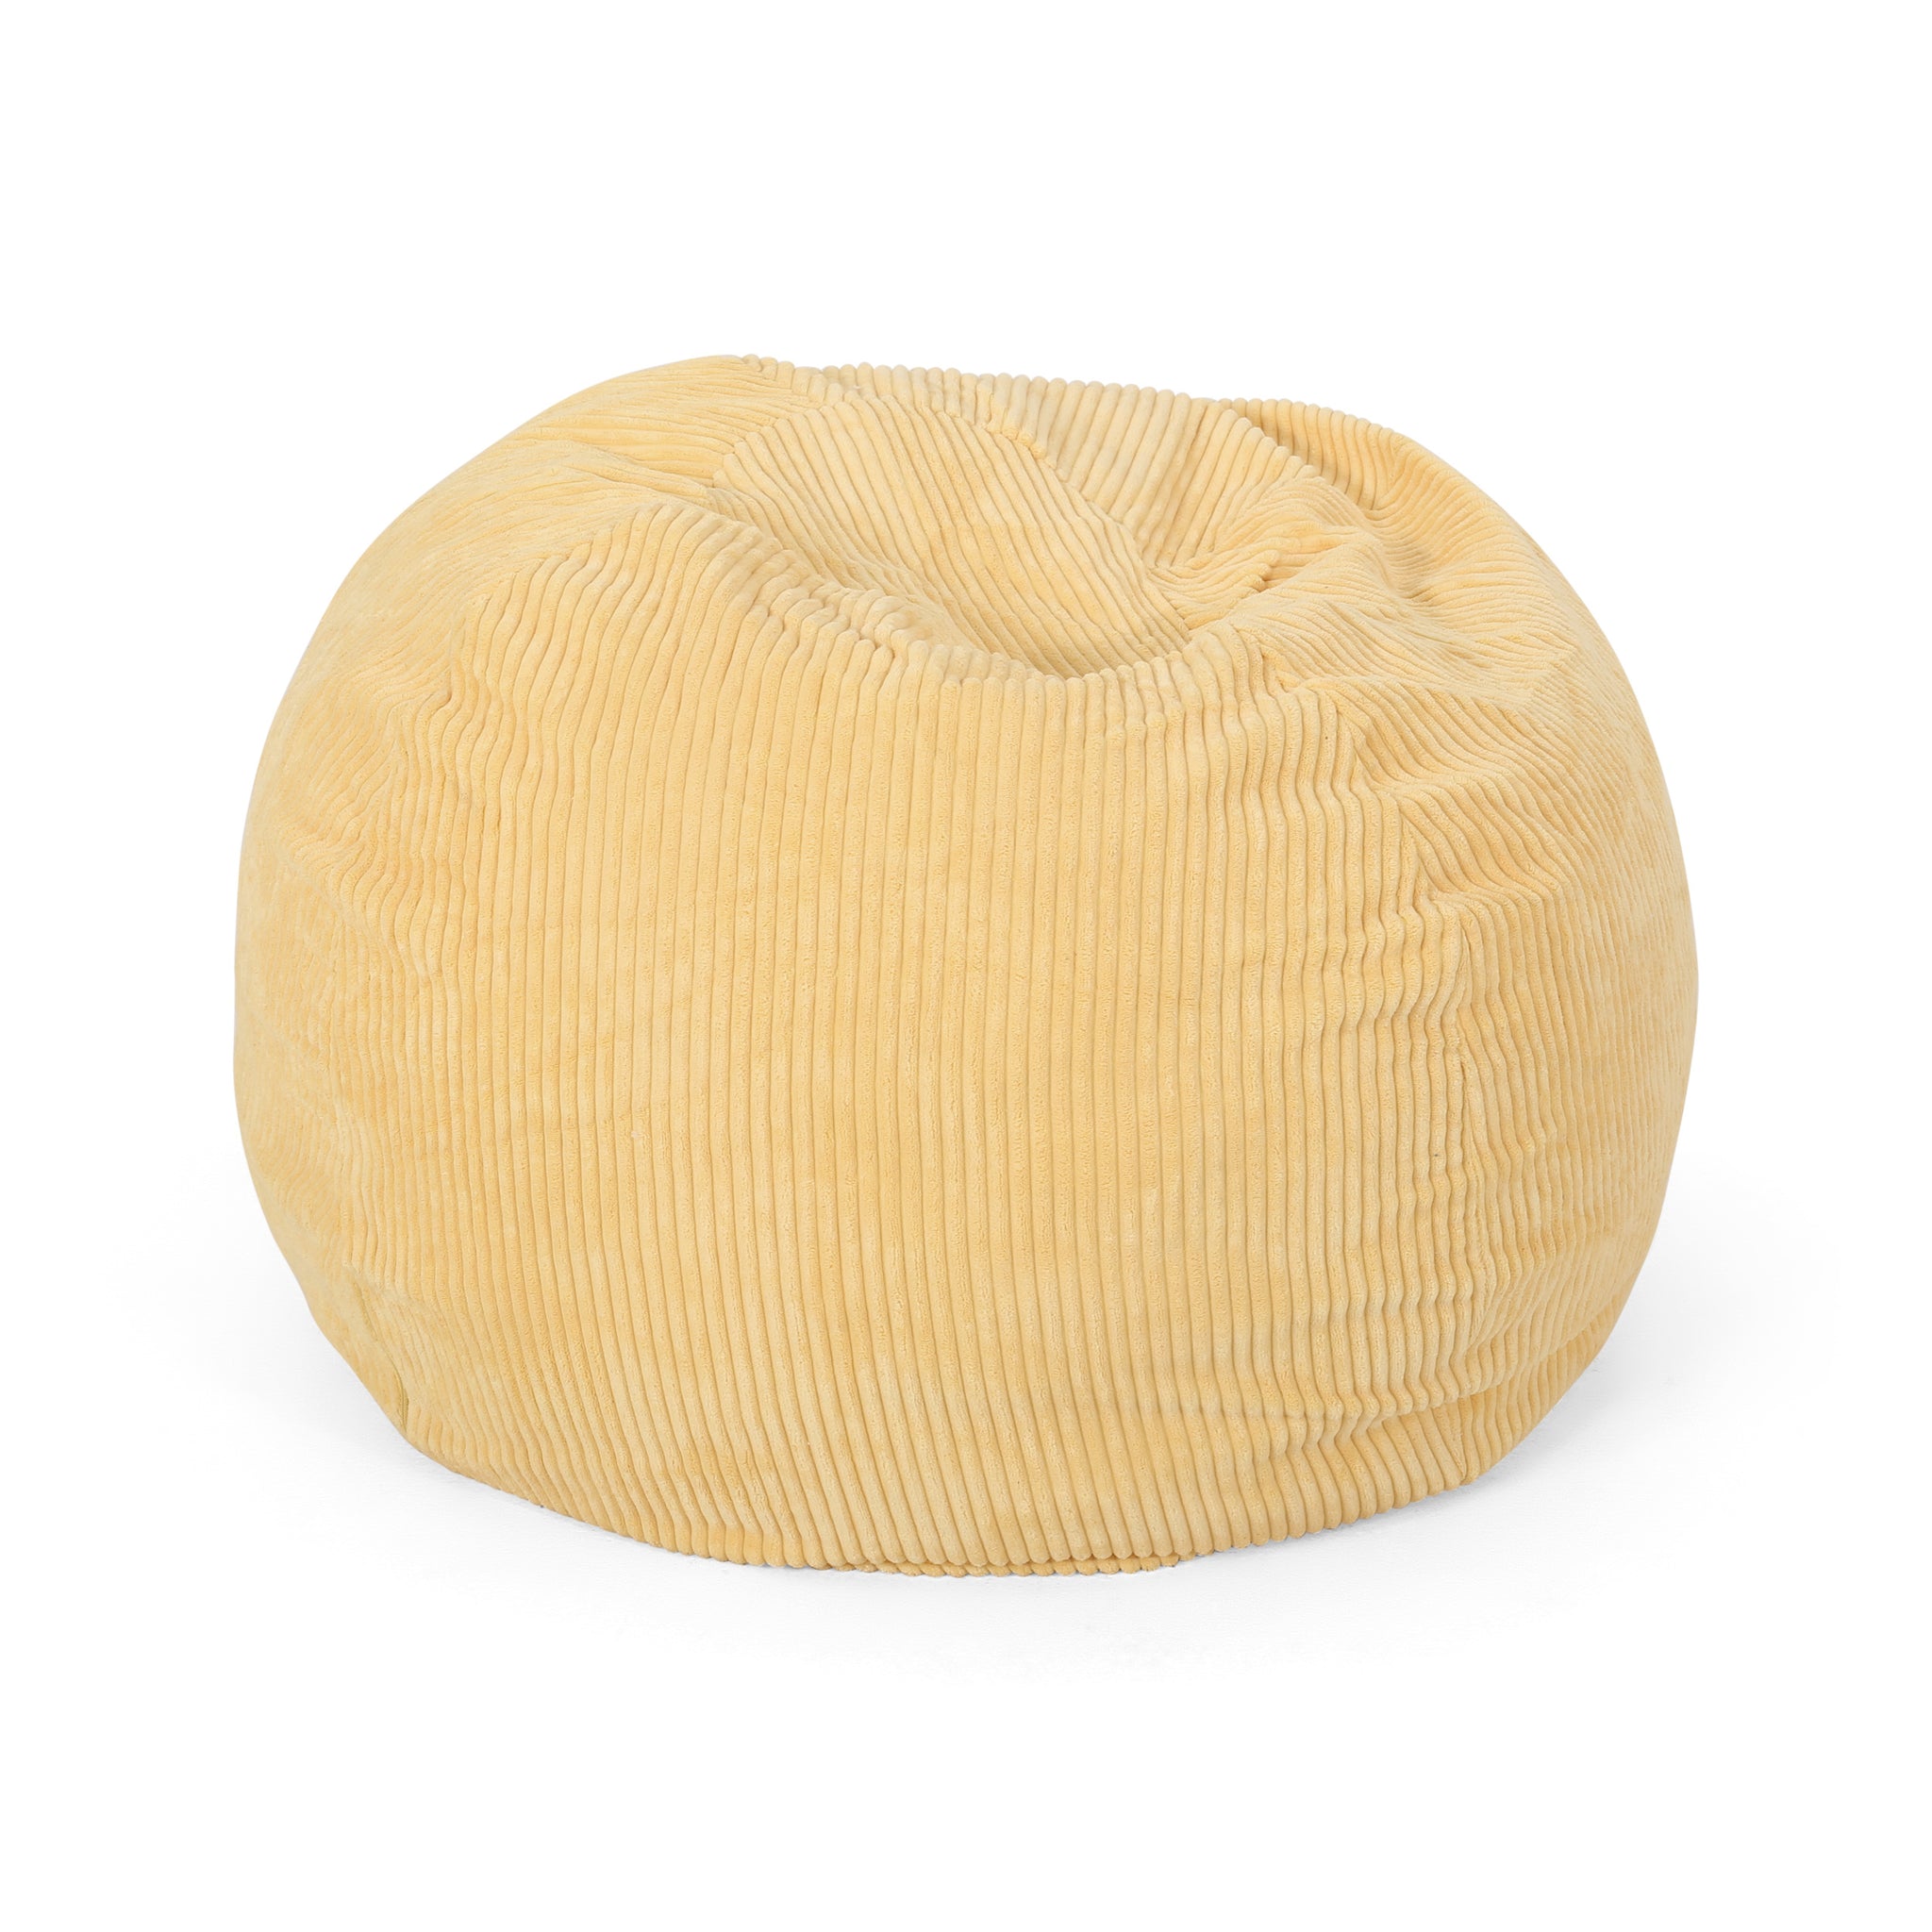 Zarate 3 Foot Corduroy Rounded Bean Bag, Mustard yellow-fabric